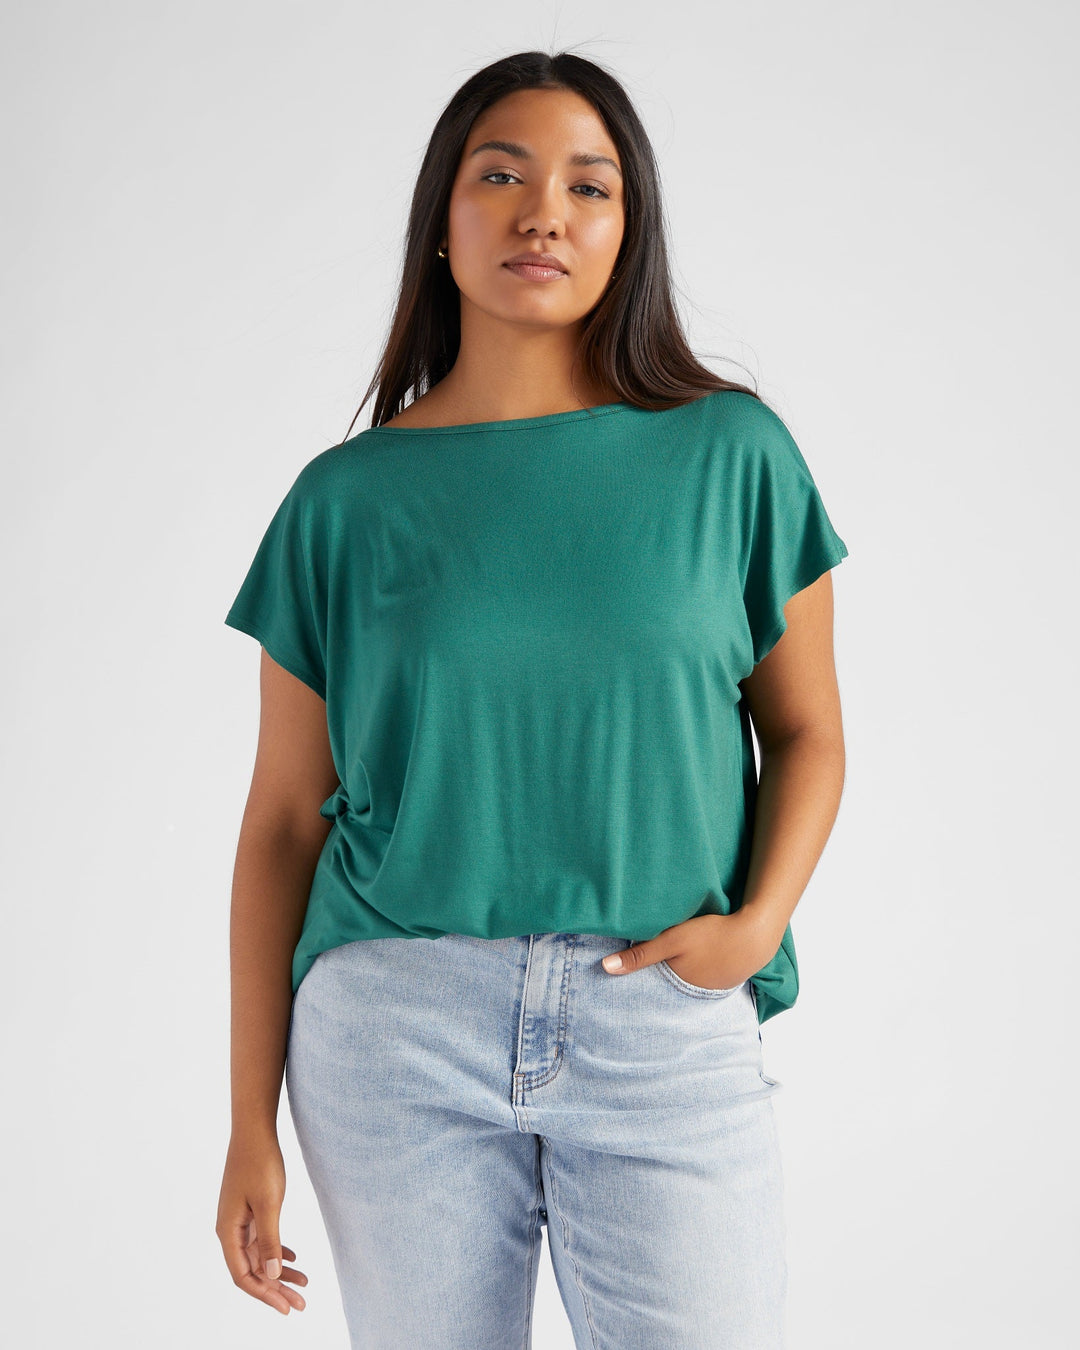 Light Hunter Green $|& 78&SUNNY Brentwood Boat Neck Top - SOF Front